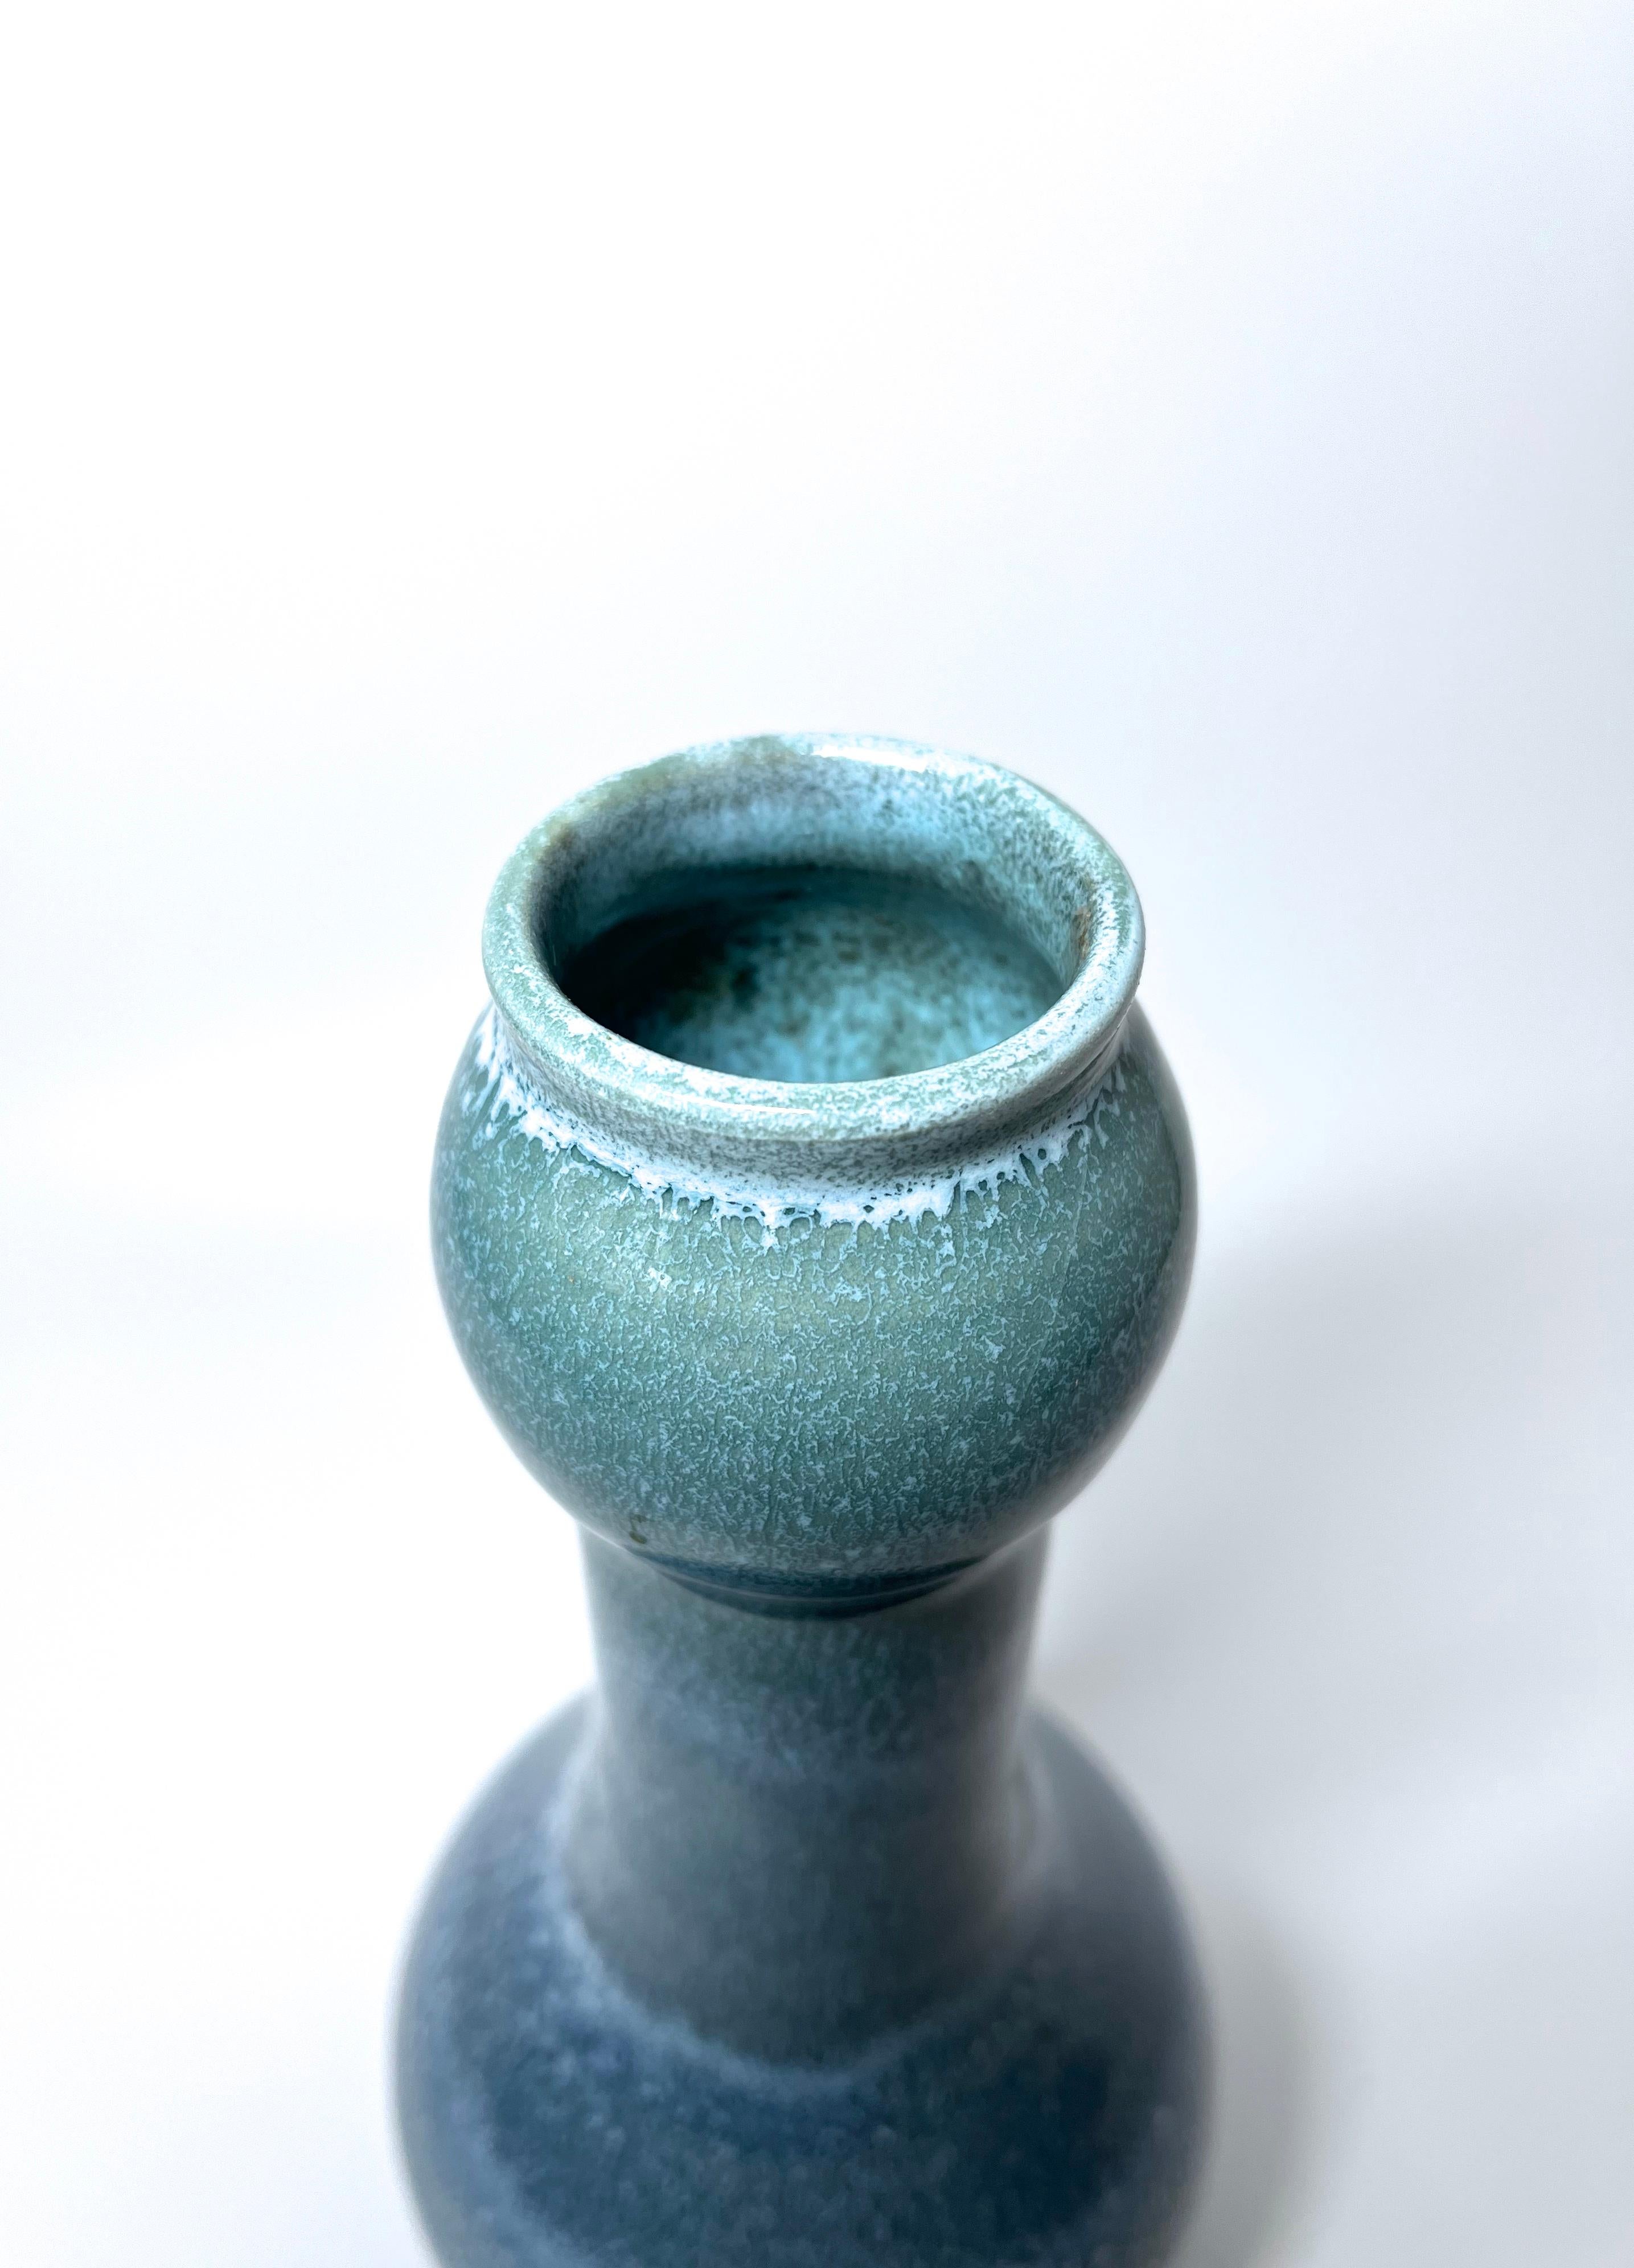 Glazed Superbly Crafted, Hand Thrown Ceramic Vase From Accolay, France 1960's For Sale